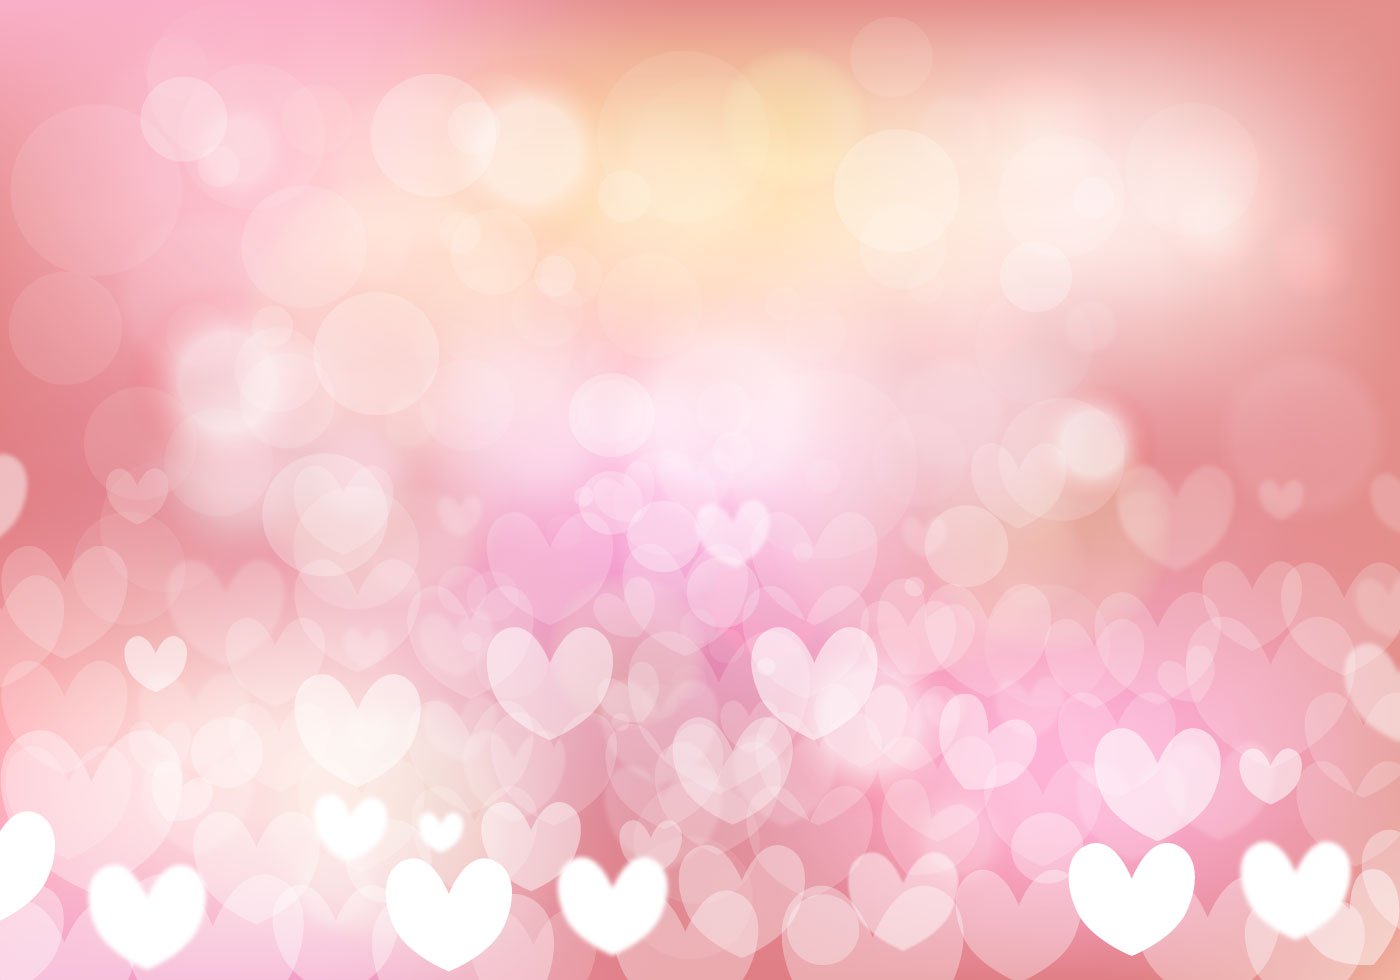 Heart Bokeh Backgrounds Related Keywords amp Suggestions